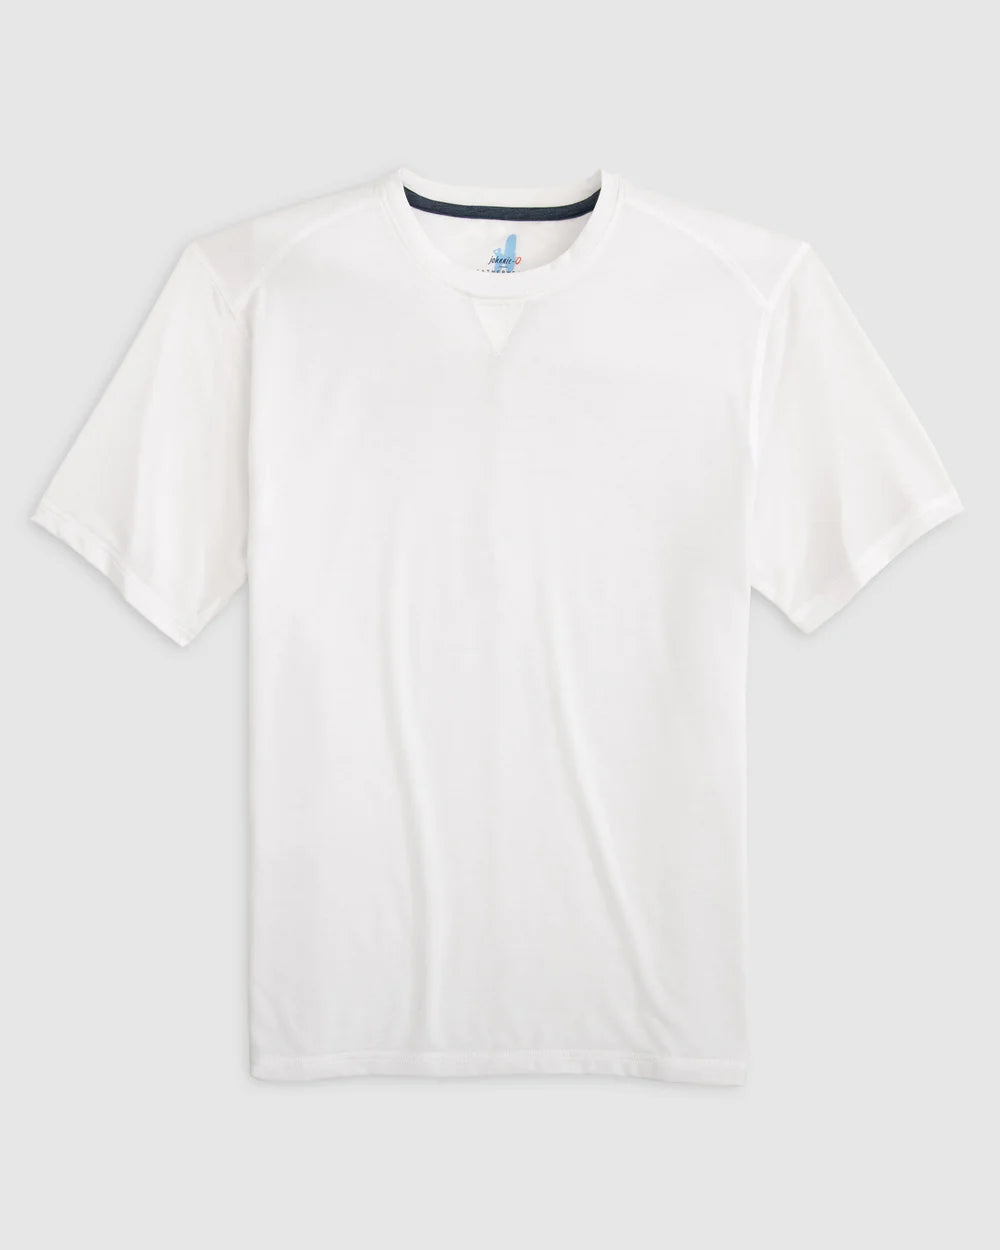 The Course Performance T-Shirt in White